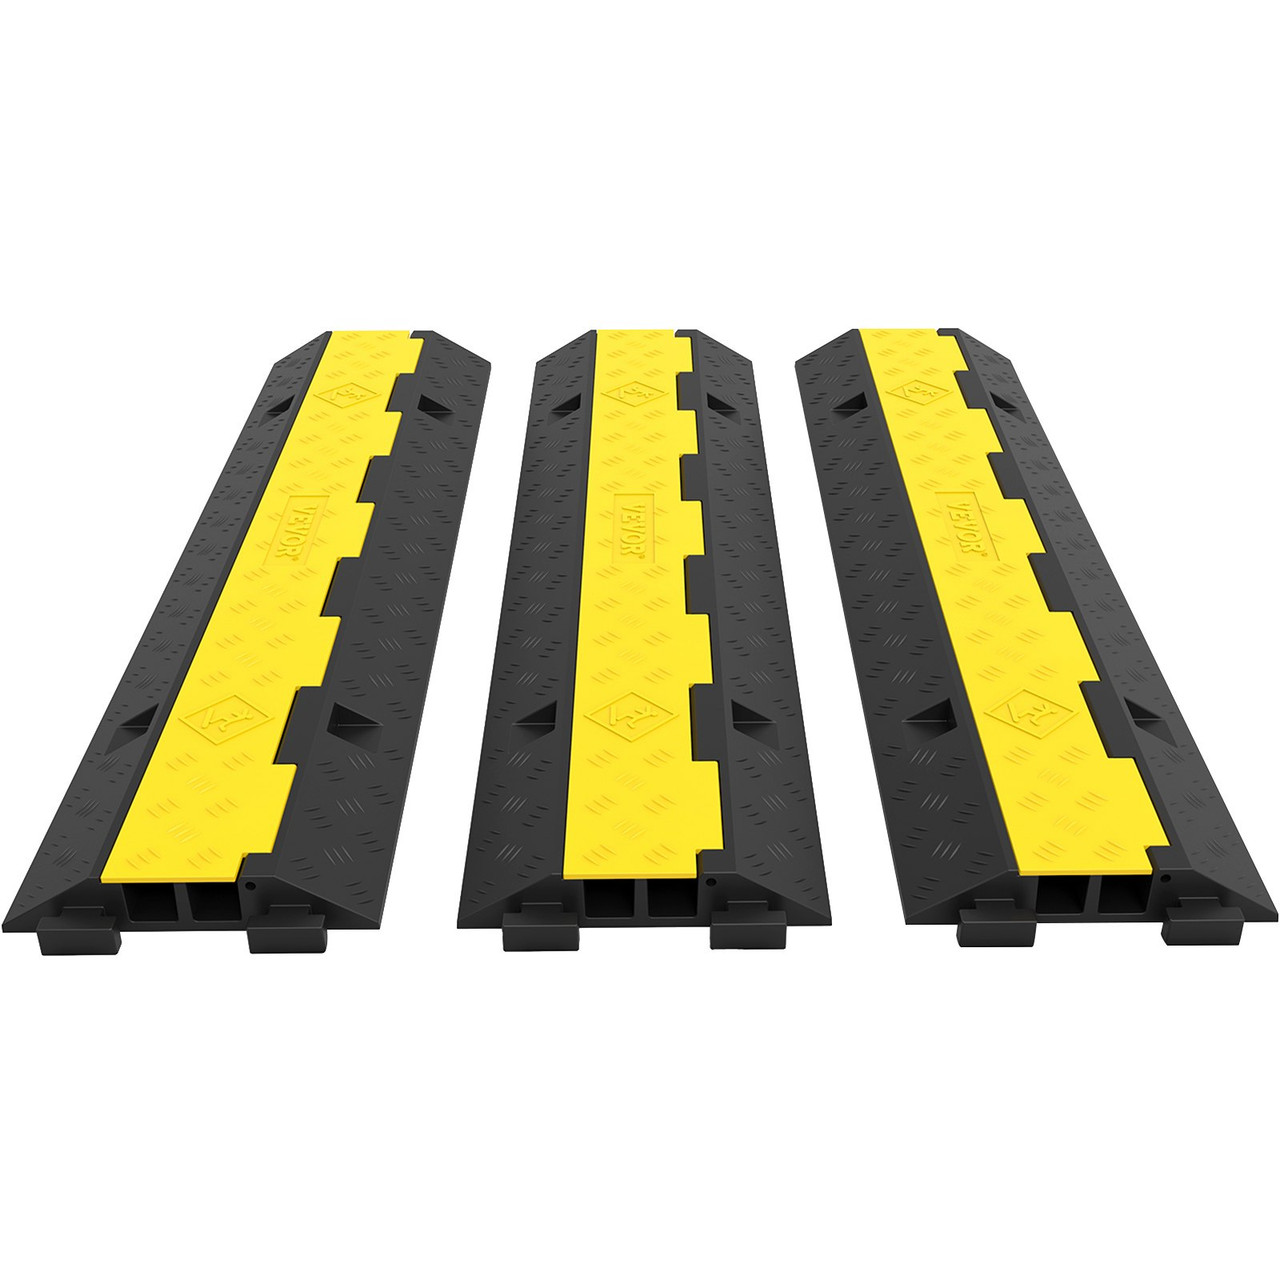 VEVOR 3 Pcs 2-Cable Rubber 40x9.8x2 Electrical Wire Cover Protector Ramp Snake Cord Vehicle